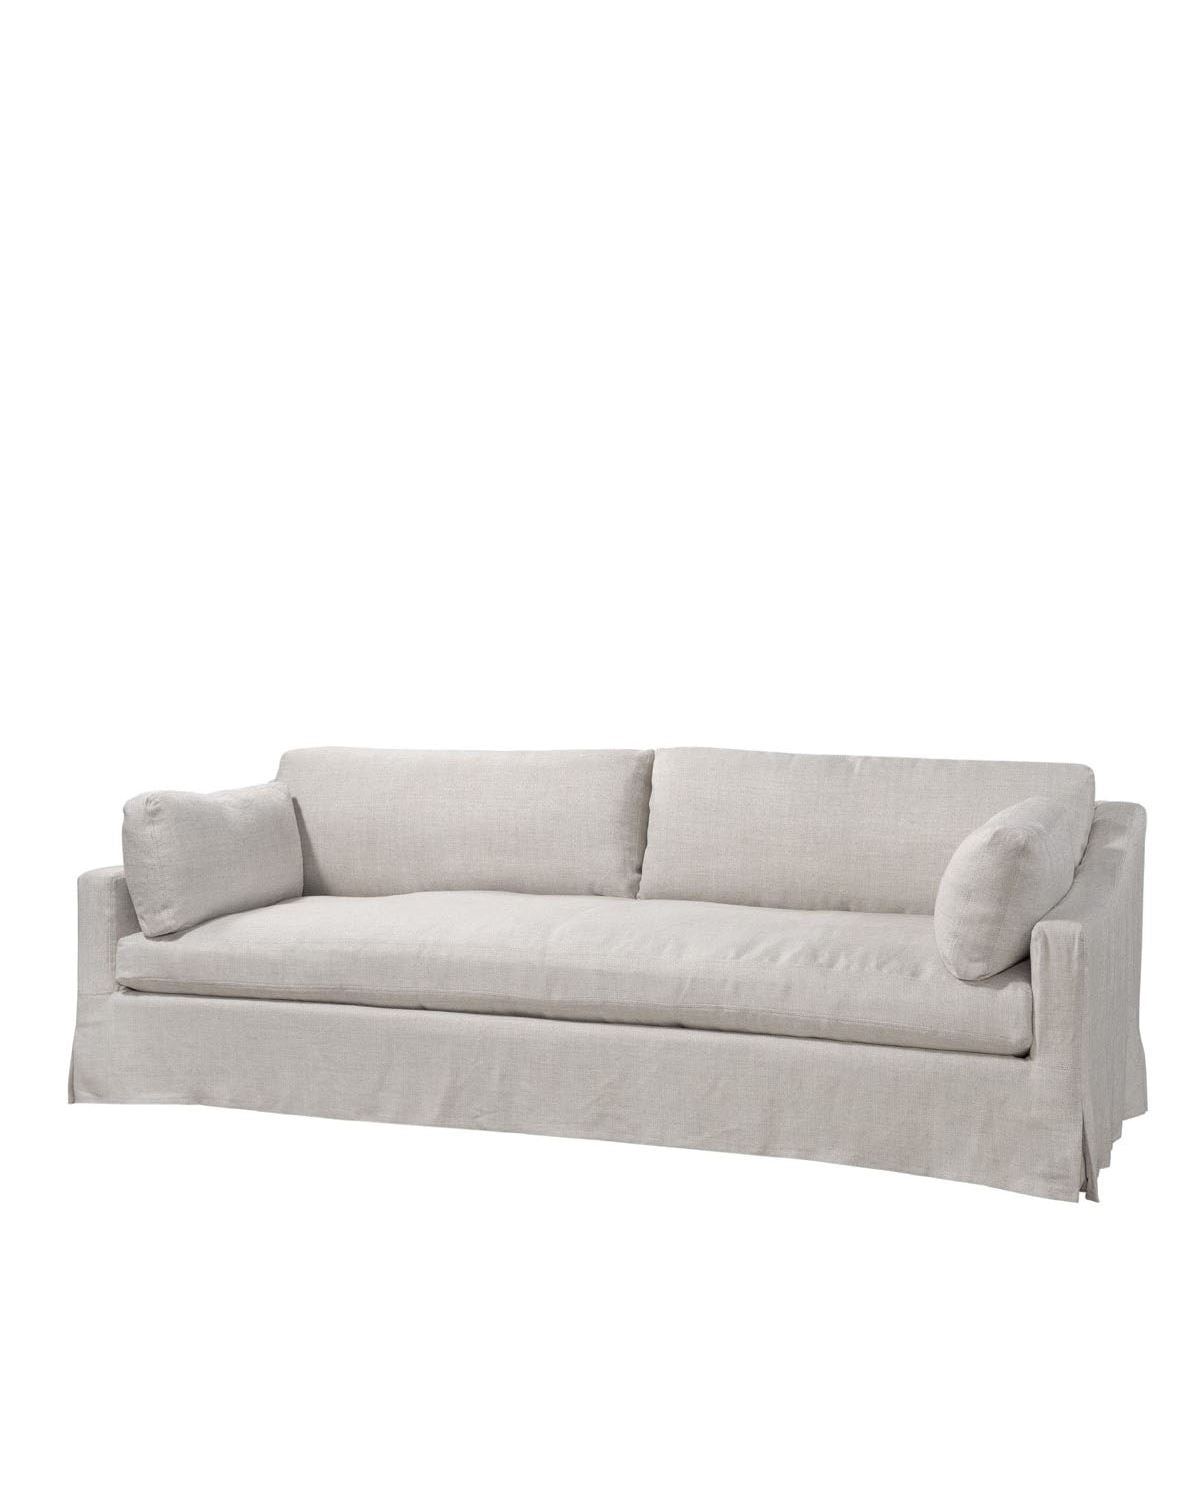 Franklin 96" Slipcovered Sofa by Huck & Peck SOFA Huck and Peck